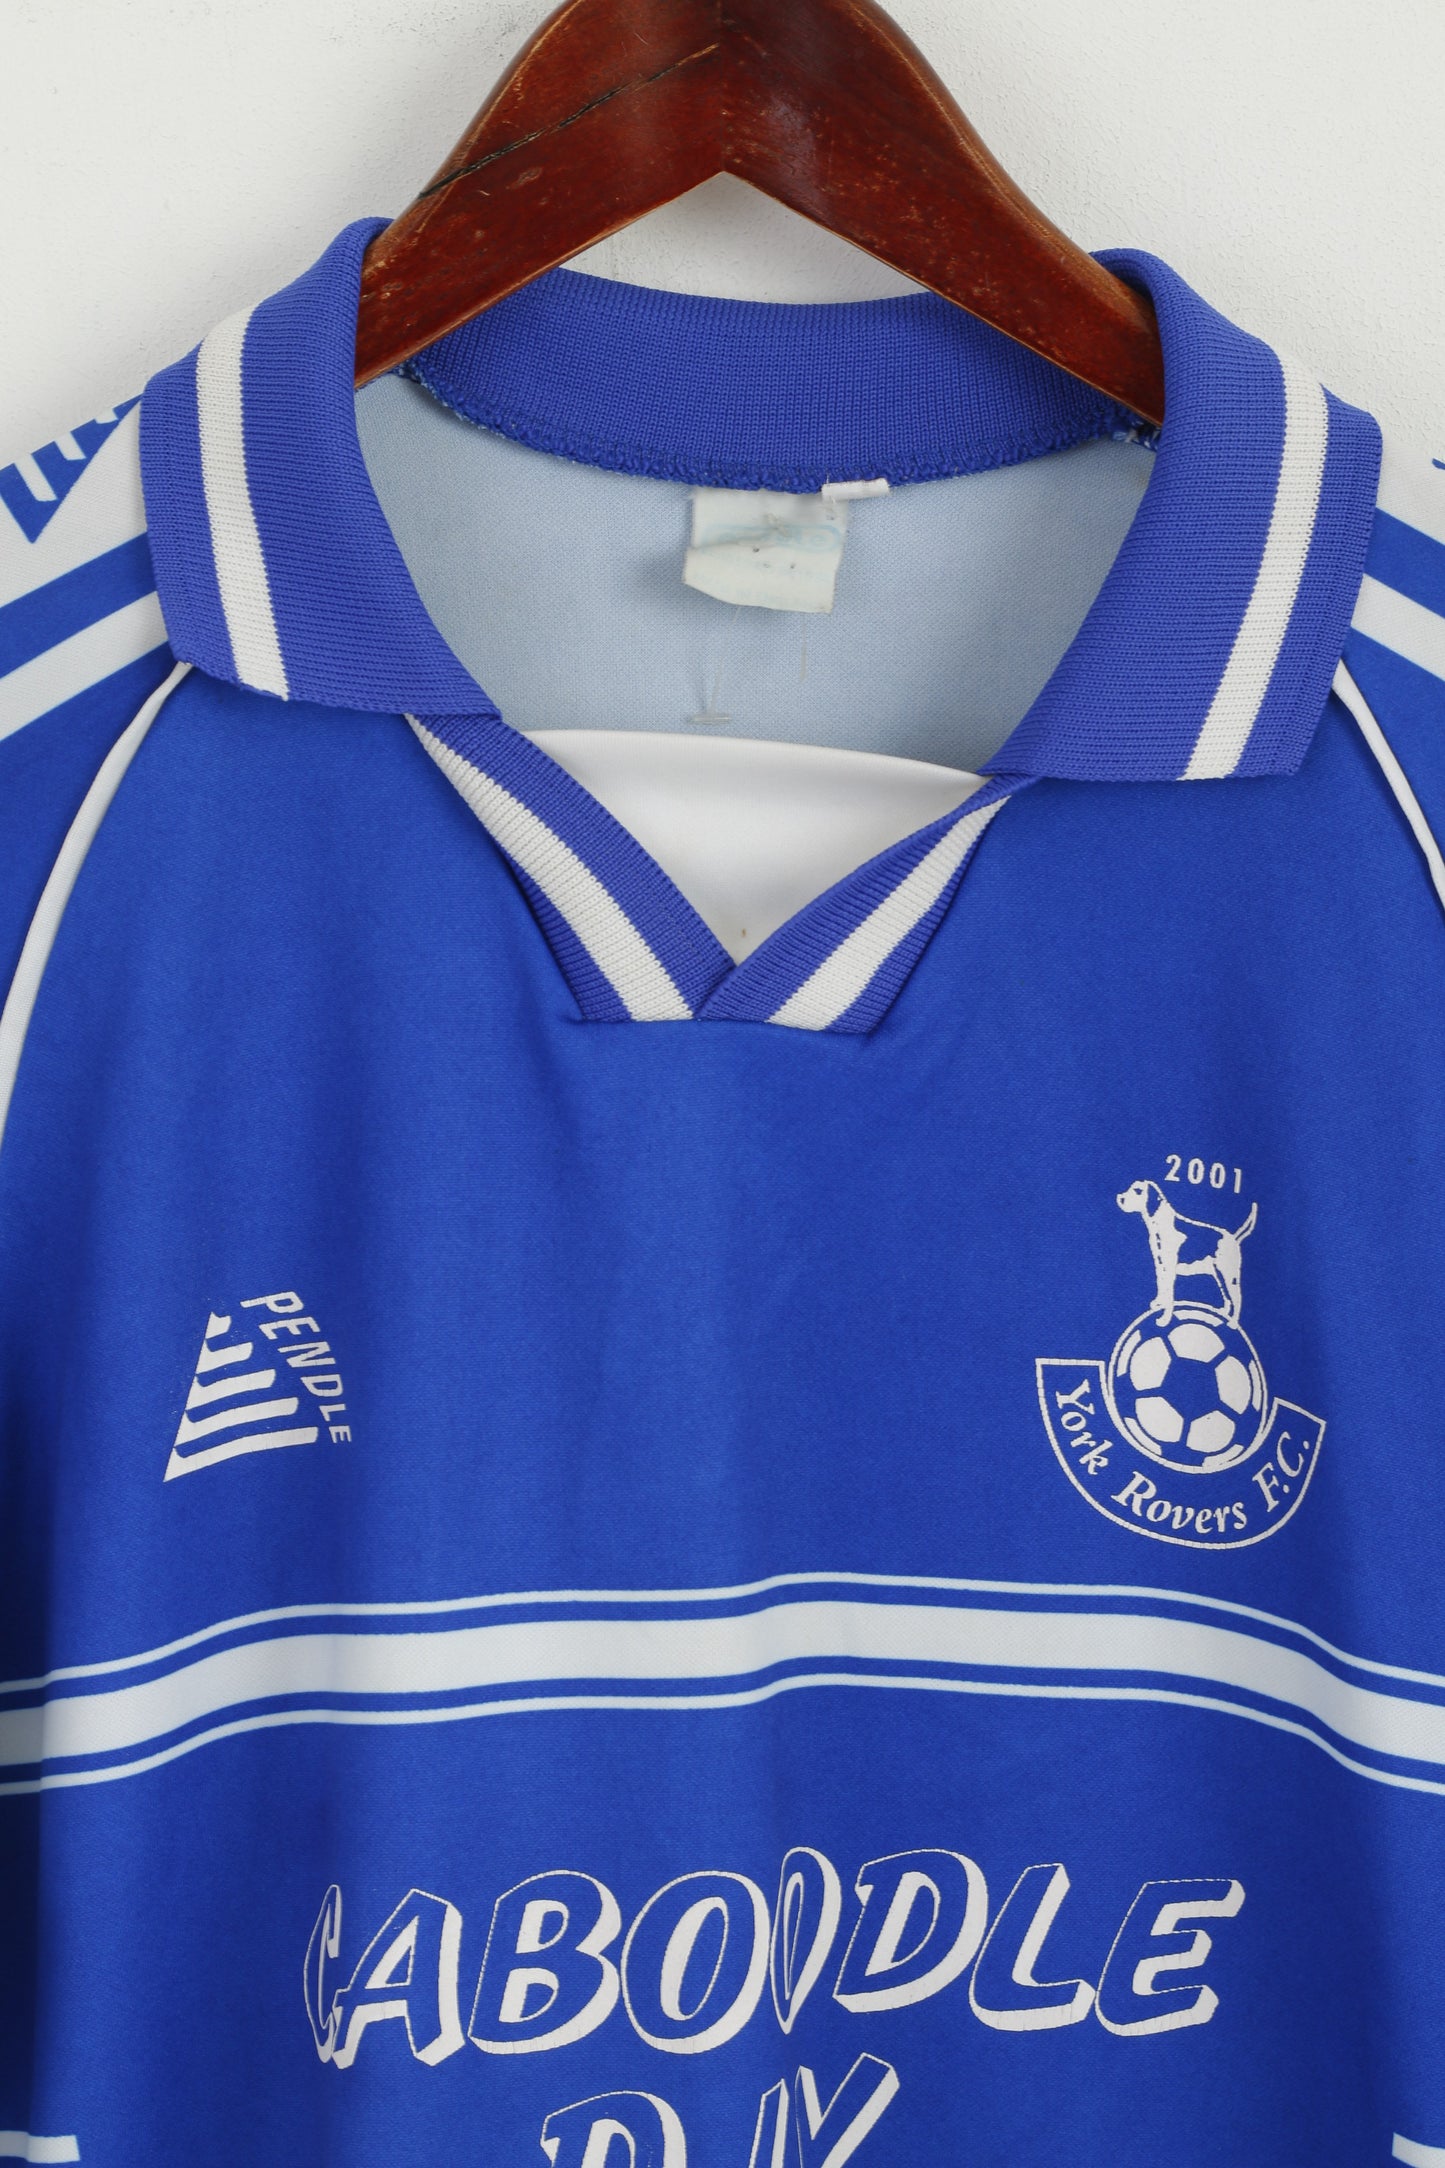 Pendle Men 36 S Polo Shirt Blue Jersey York Rovers FC #8 Football Vintage Top